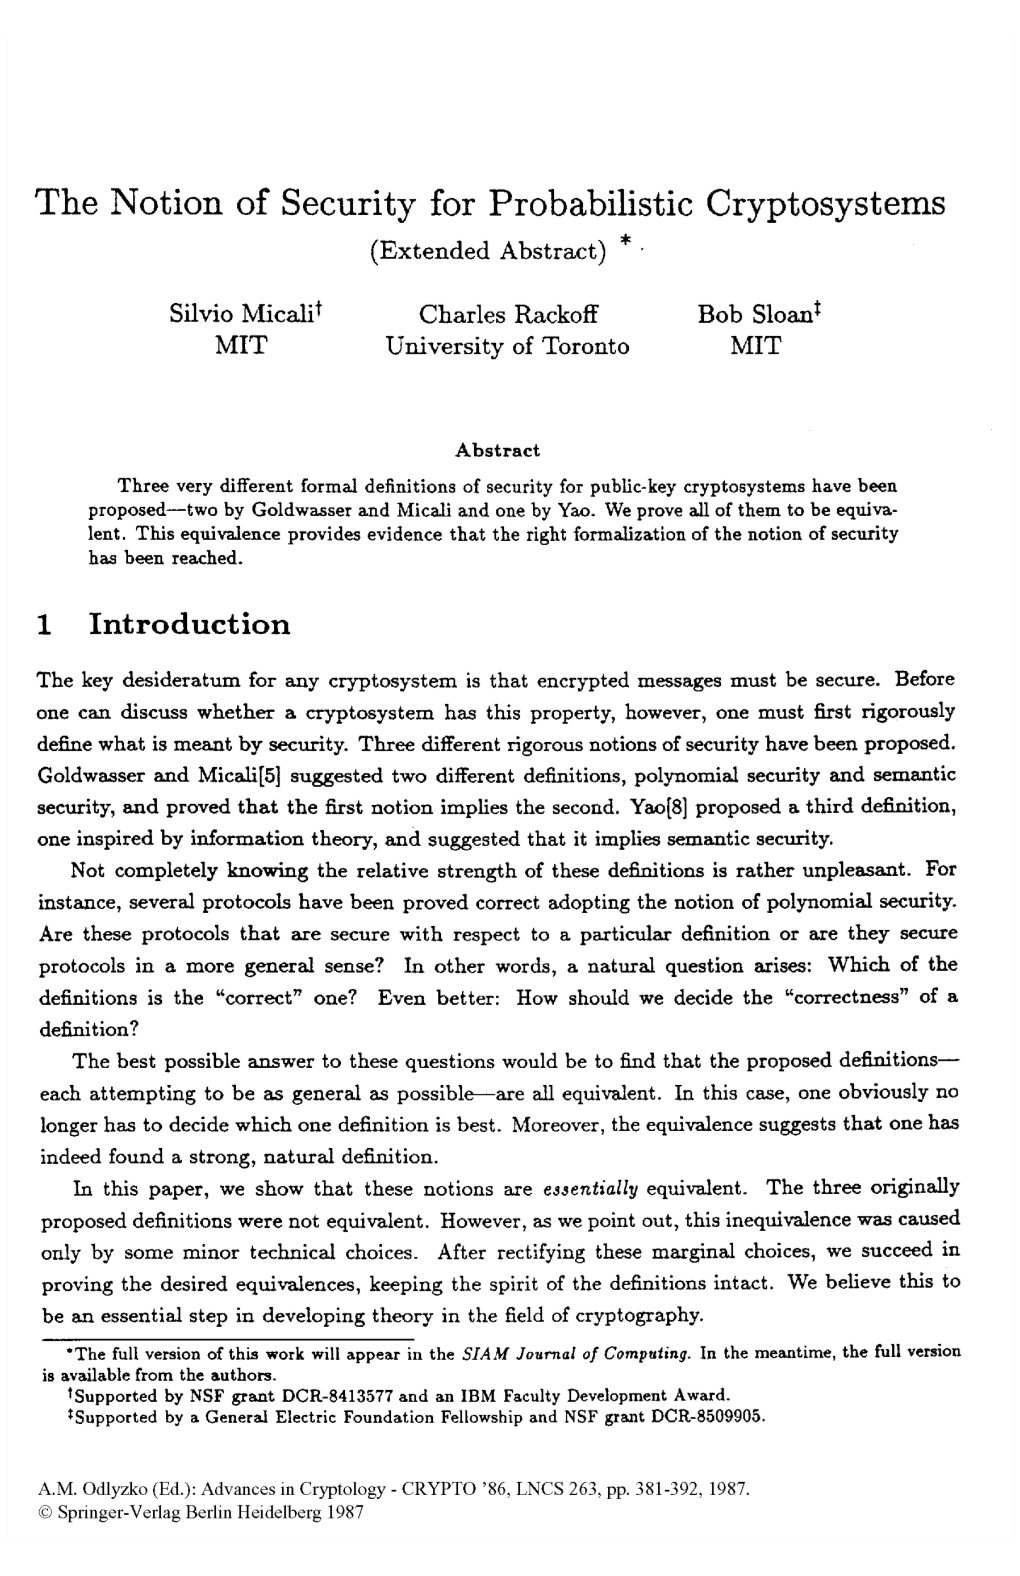 The Notion of Security for Probabilistic Cryptosystems (Extended Abstract) *